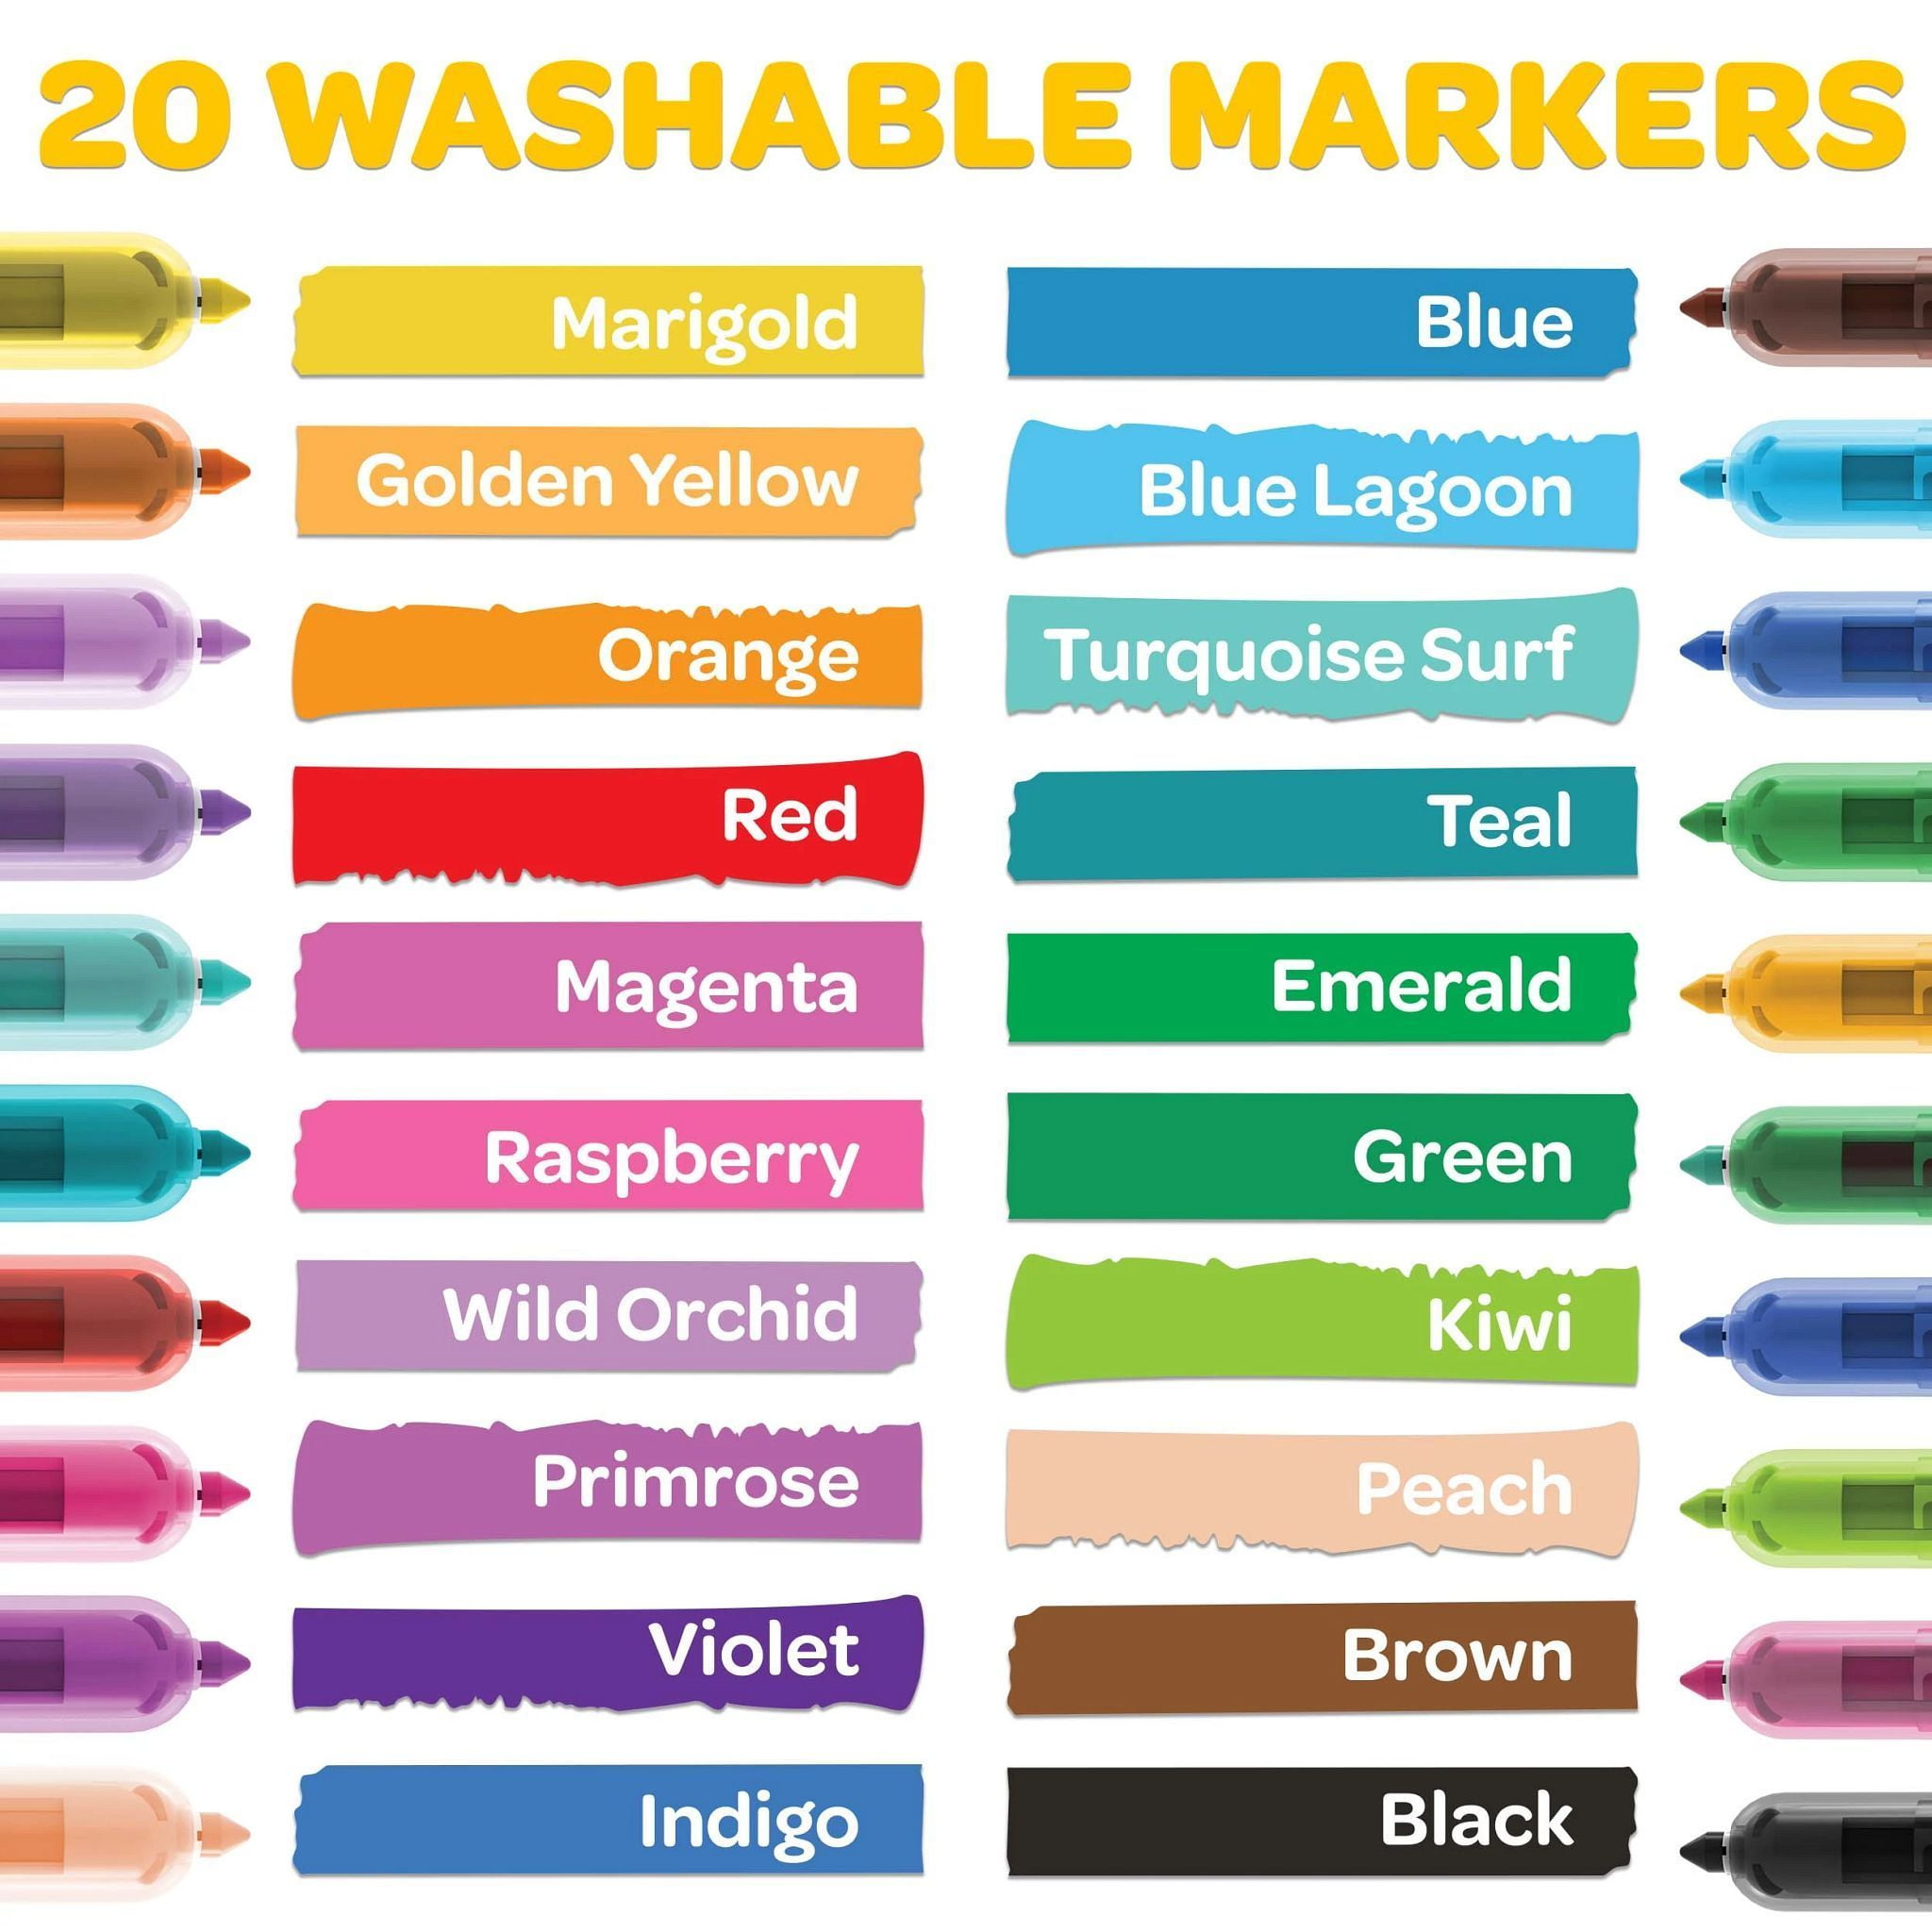 Crayola Clicks retractable markers are now in a 20 pack. @crayola